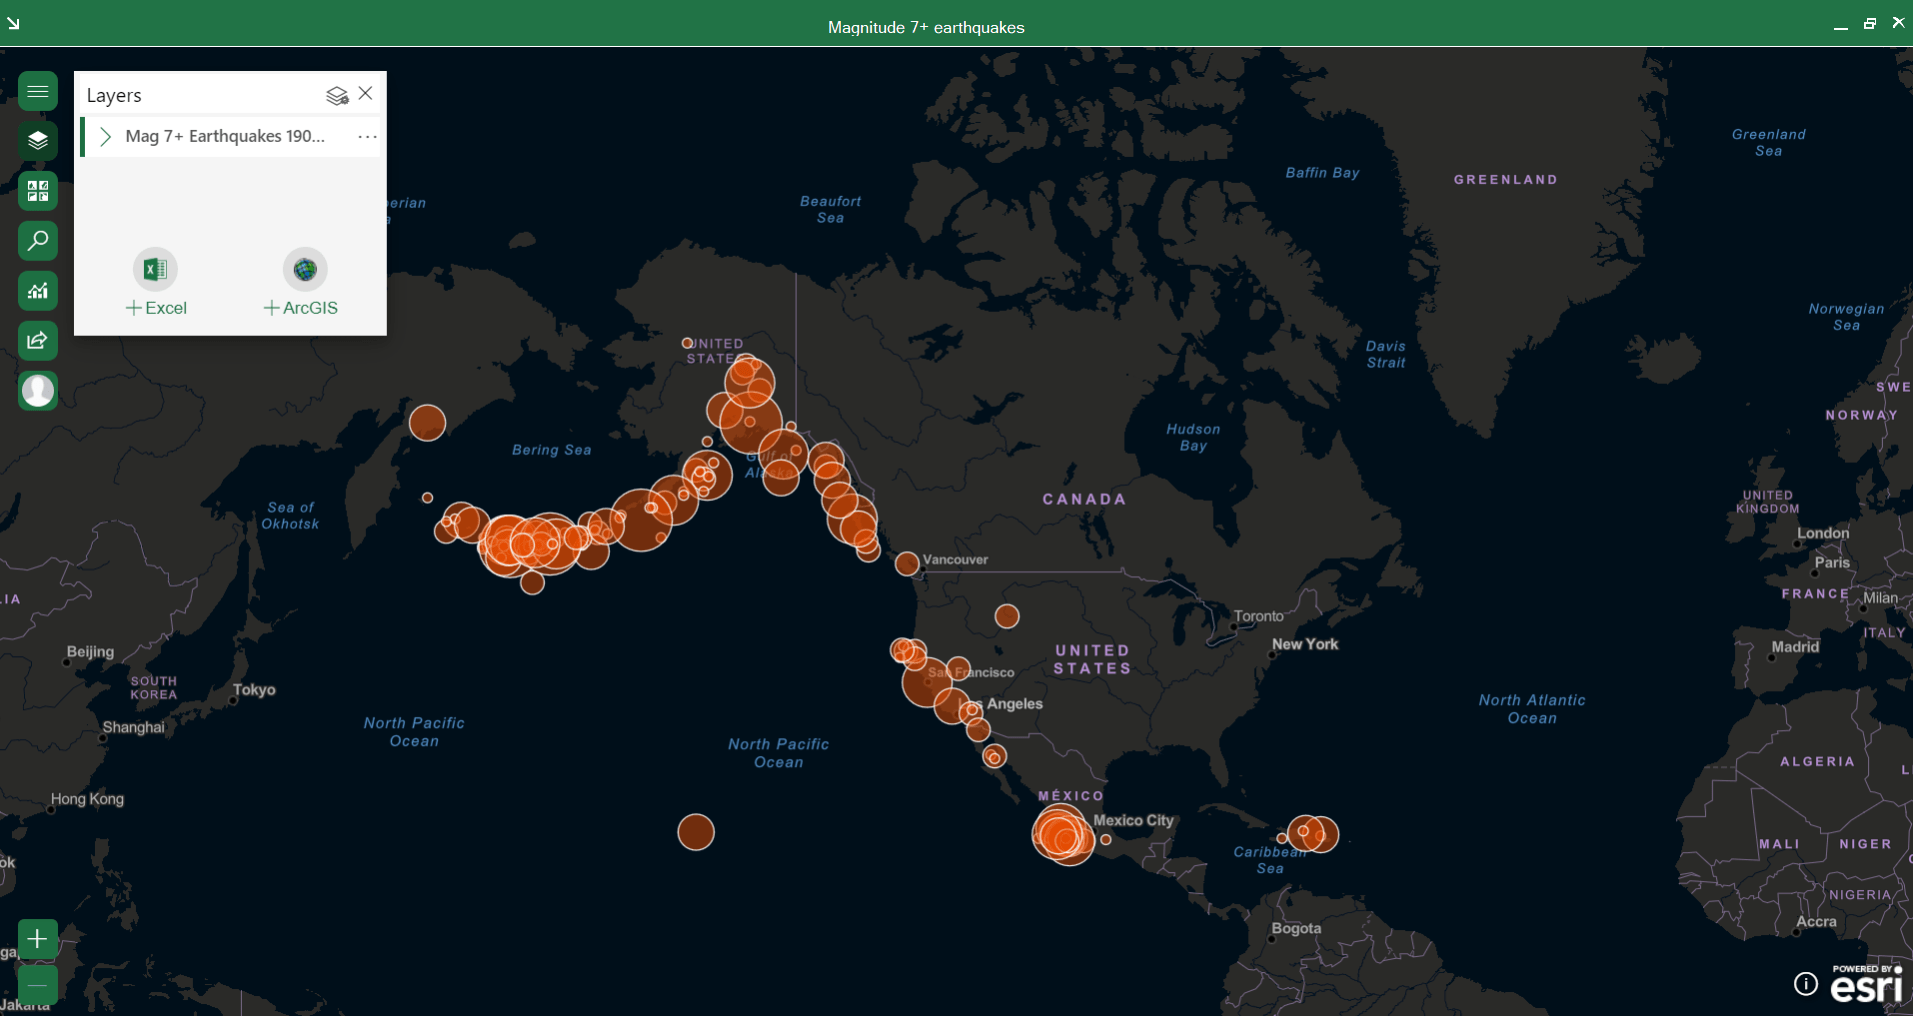 Map showing North American earthquakes in ArcGIS for Office